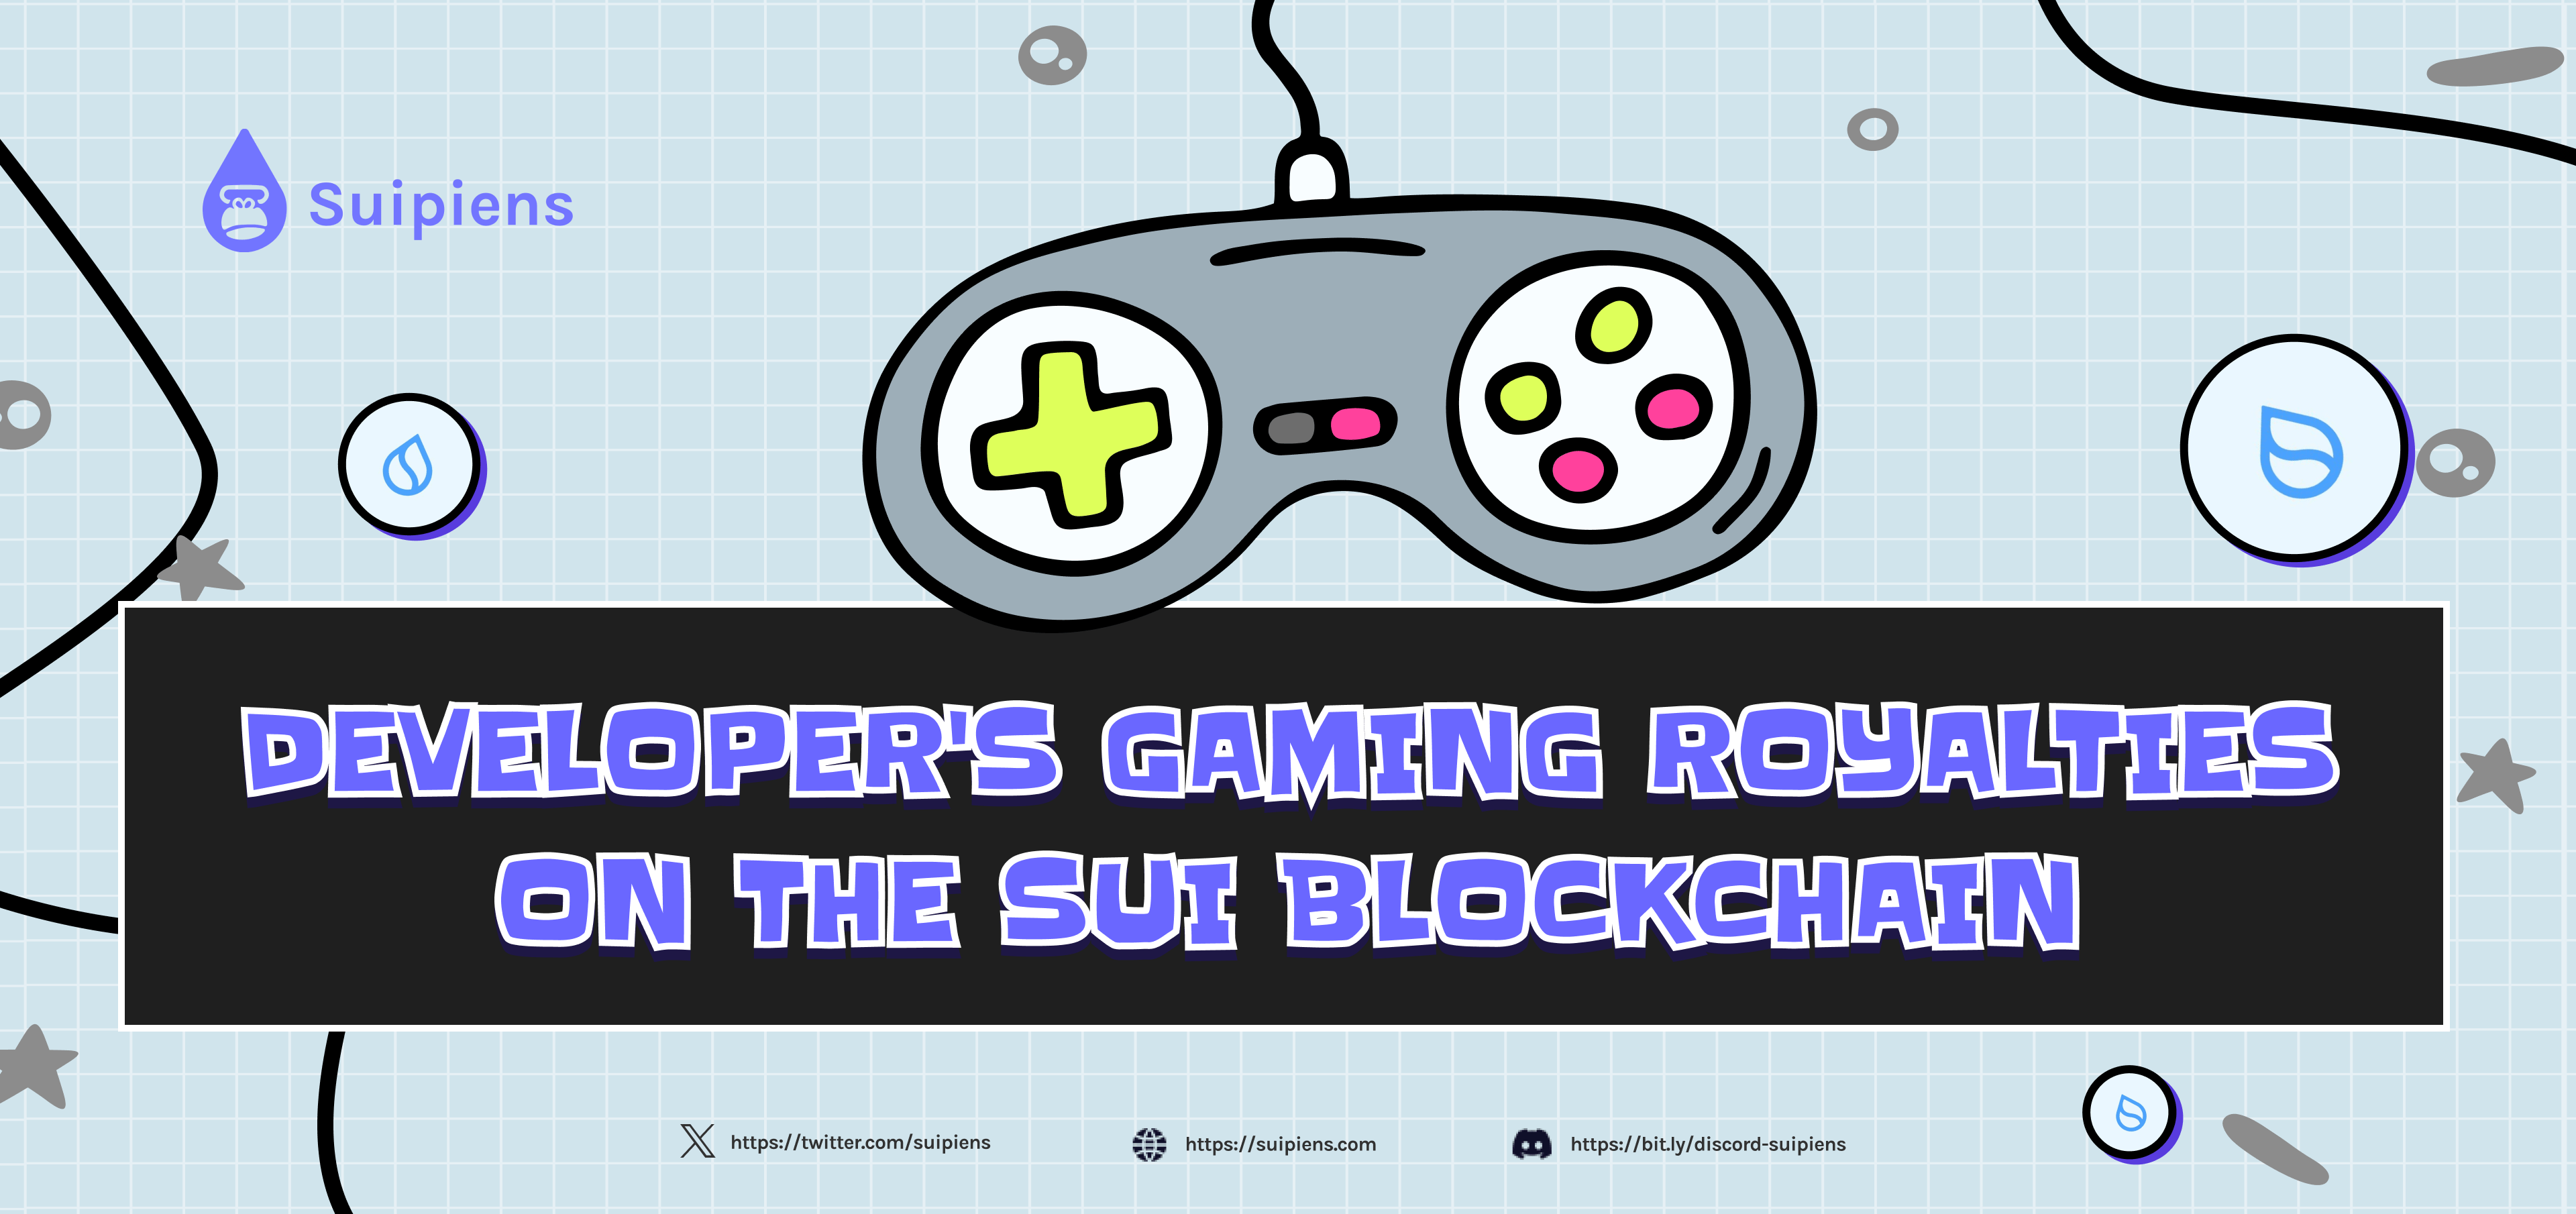 Developer's Gaming Royalties On The Sui Blockchain